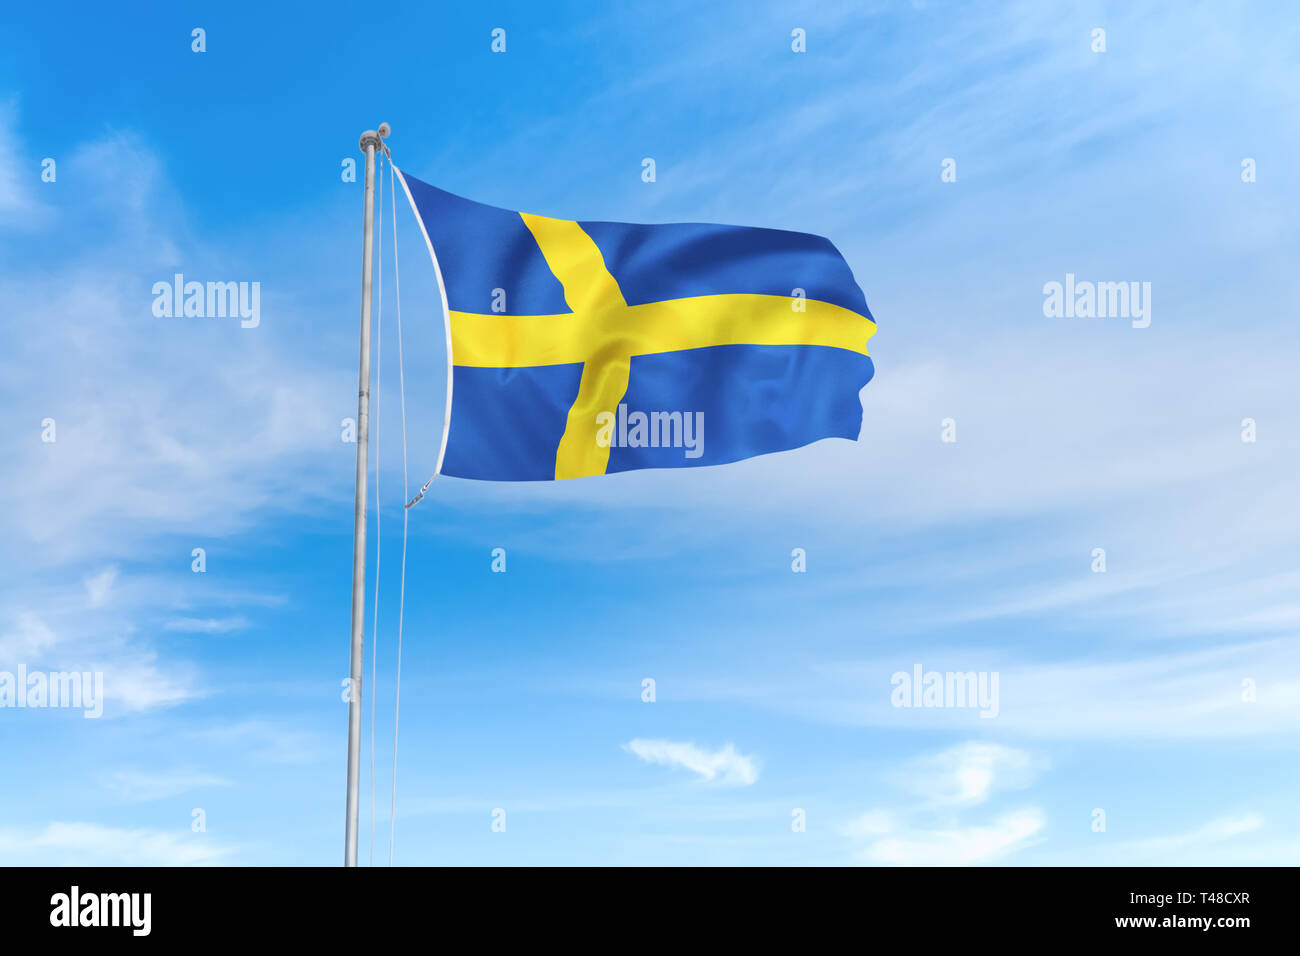 Sweden flag blowing in the wind over nice blue sky background Stock Photo